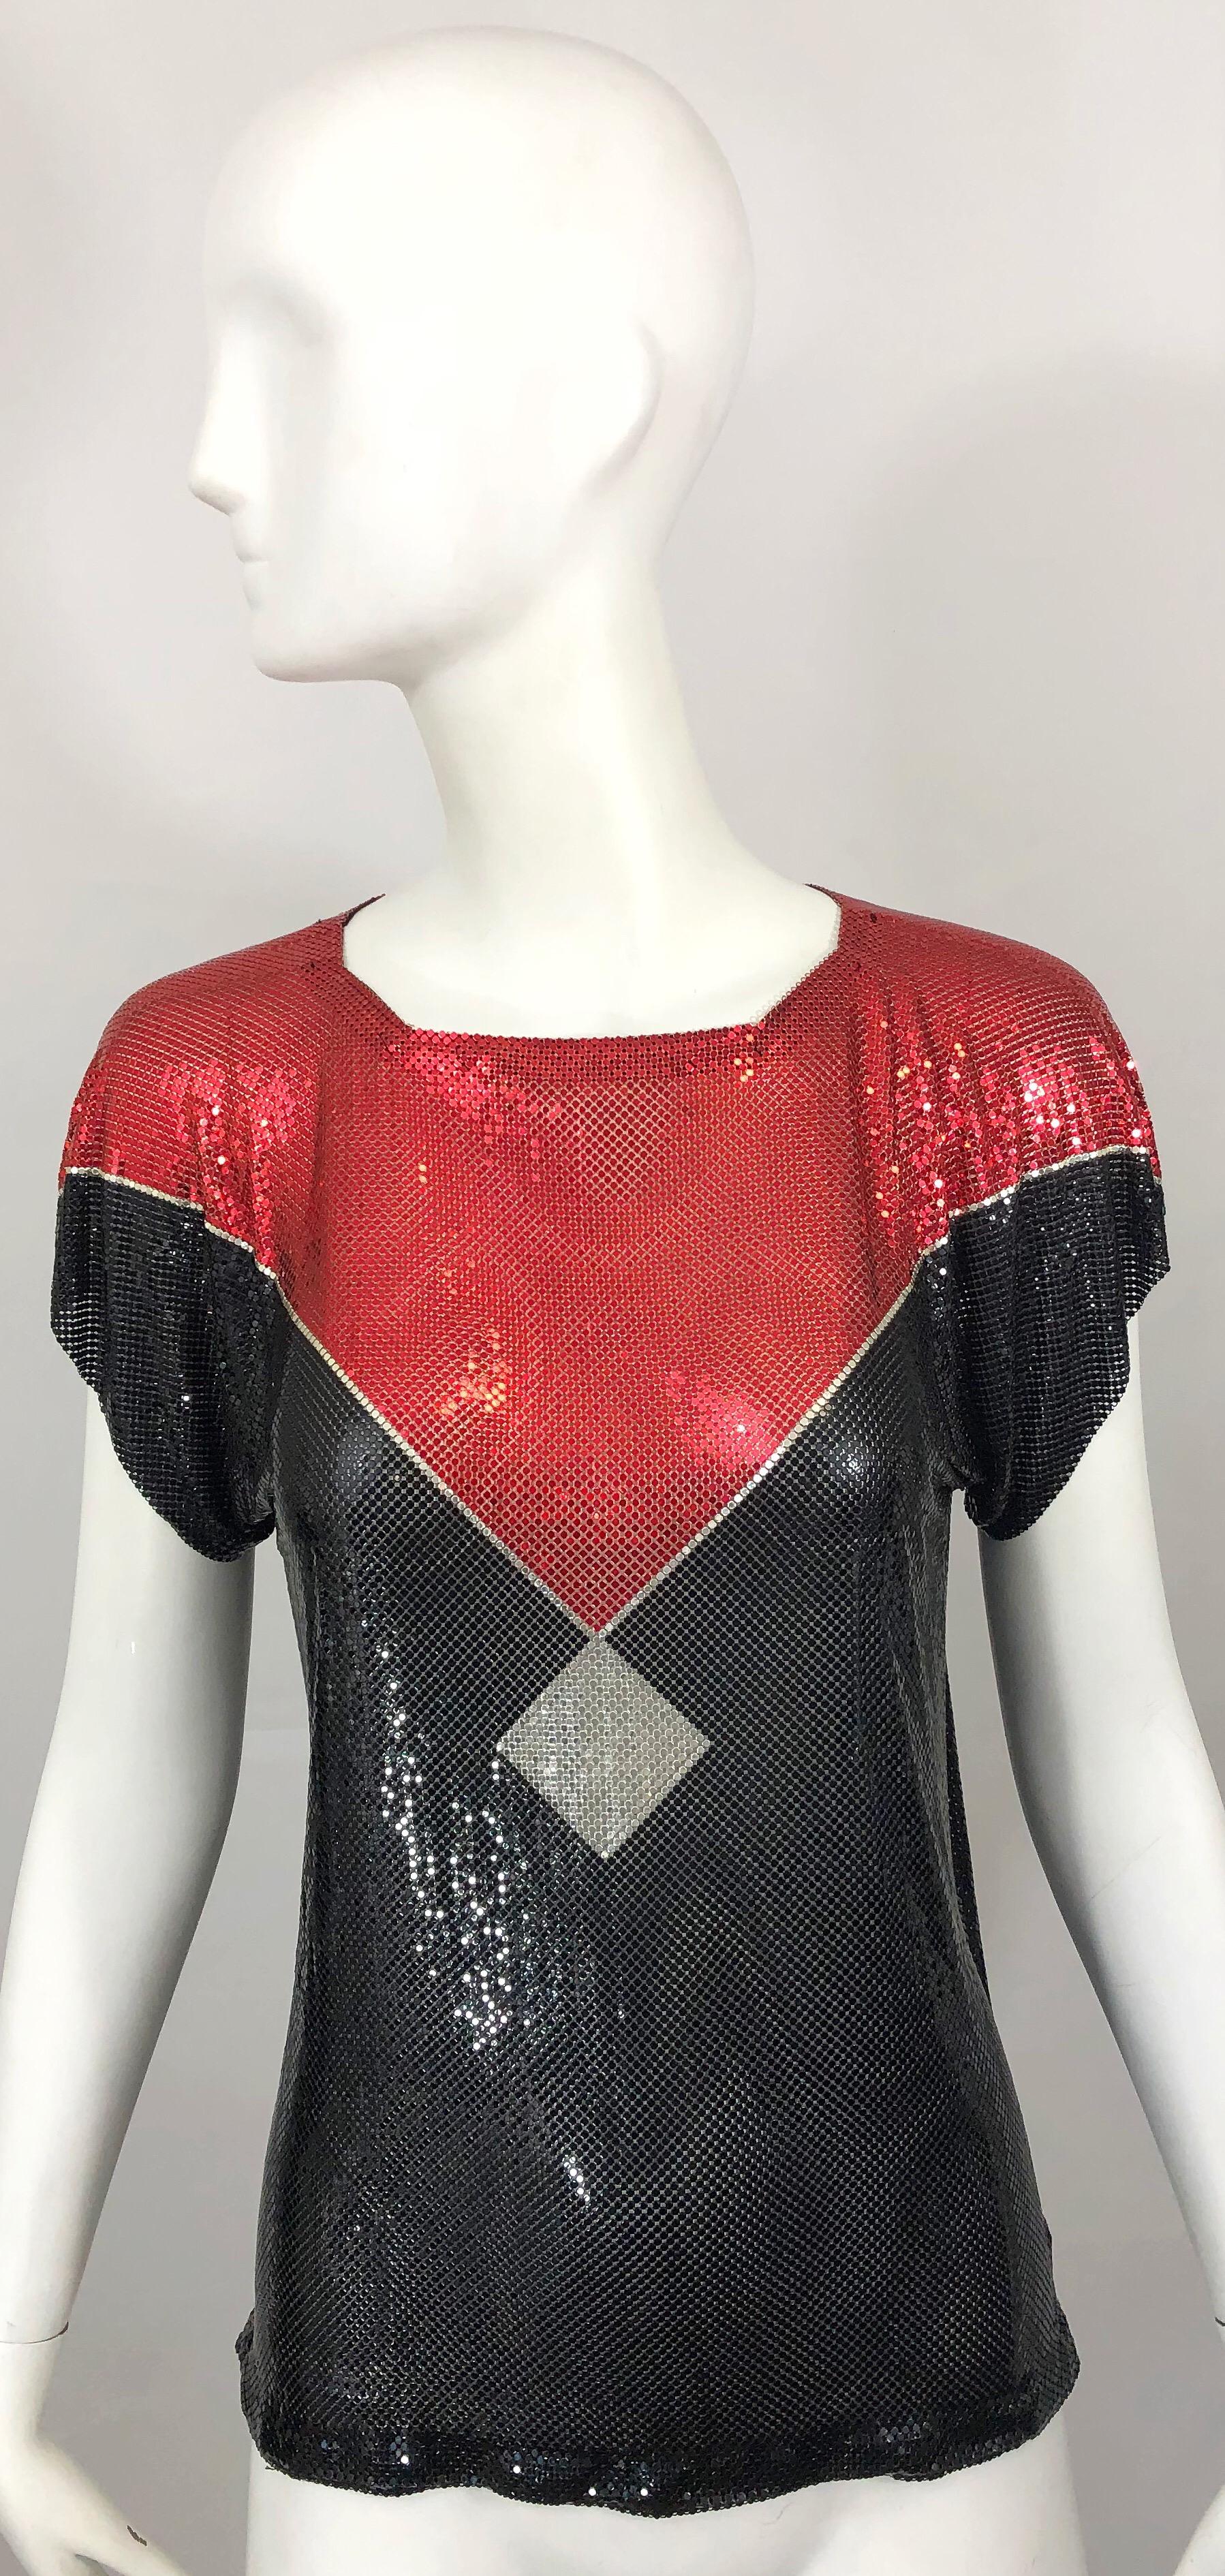 Avant Garde vintage 70s WHITING & DAVIS red, black and silver chainmail metal mesh top / blouse! I have had quite a few W&D pieces over the years, but I have never seen one so unique! Signature chainmail is expertly produced. This rare gem also